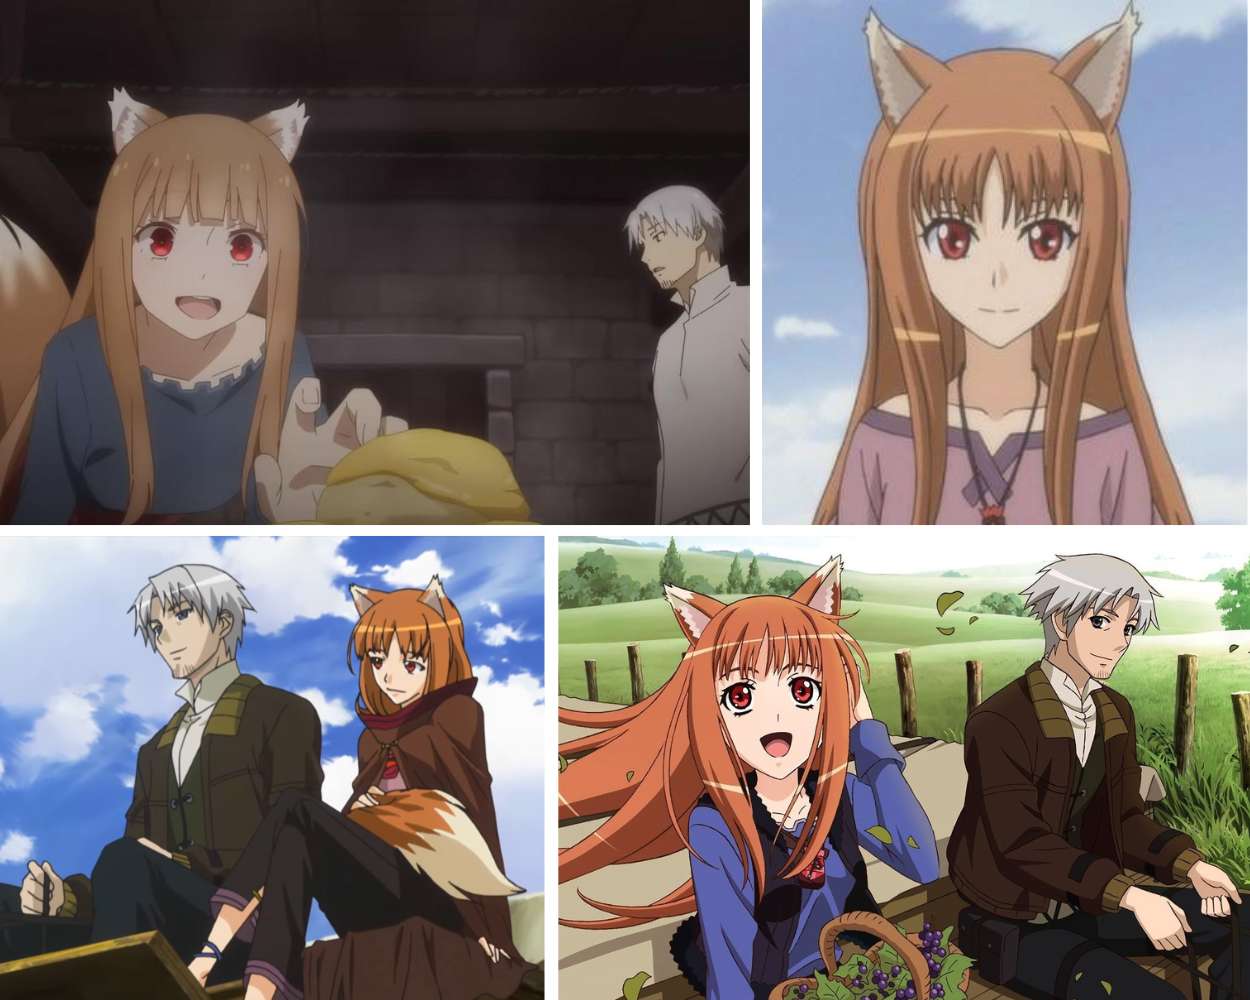 The Wandering Wolf Holo from Spice and Wolf